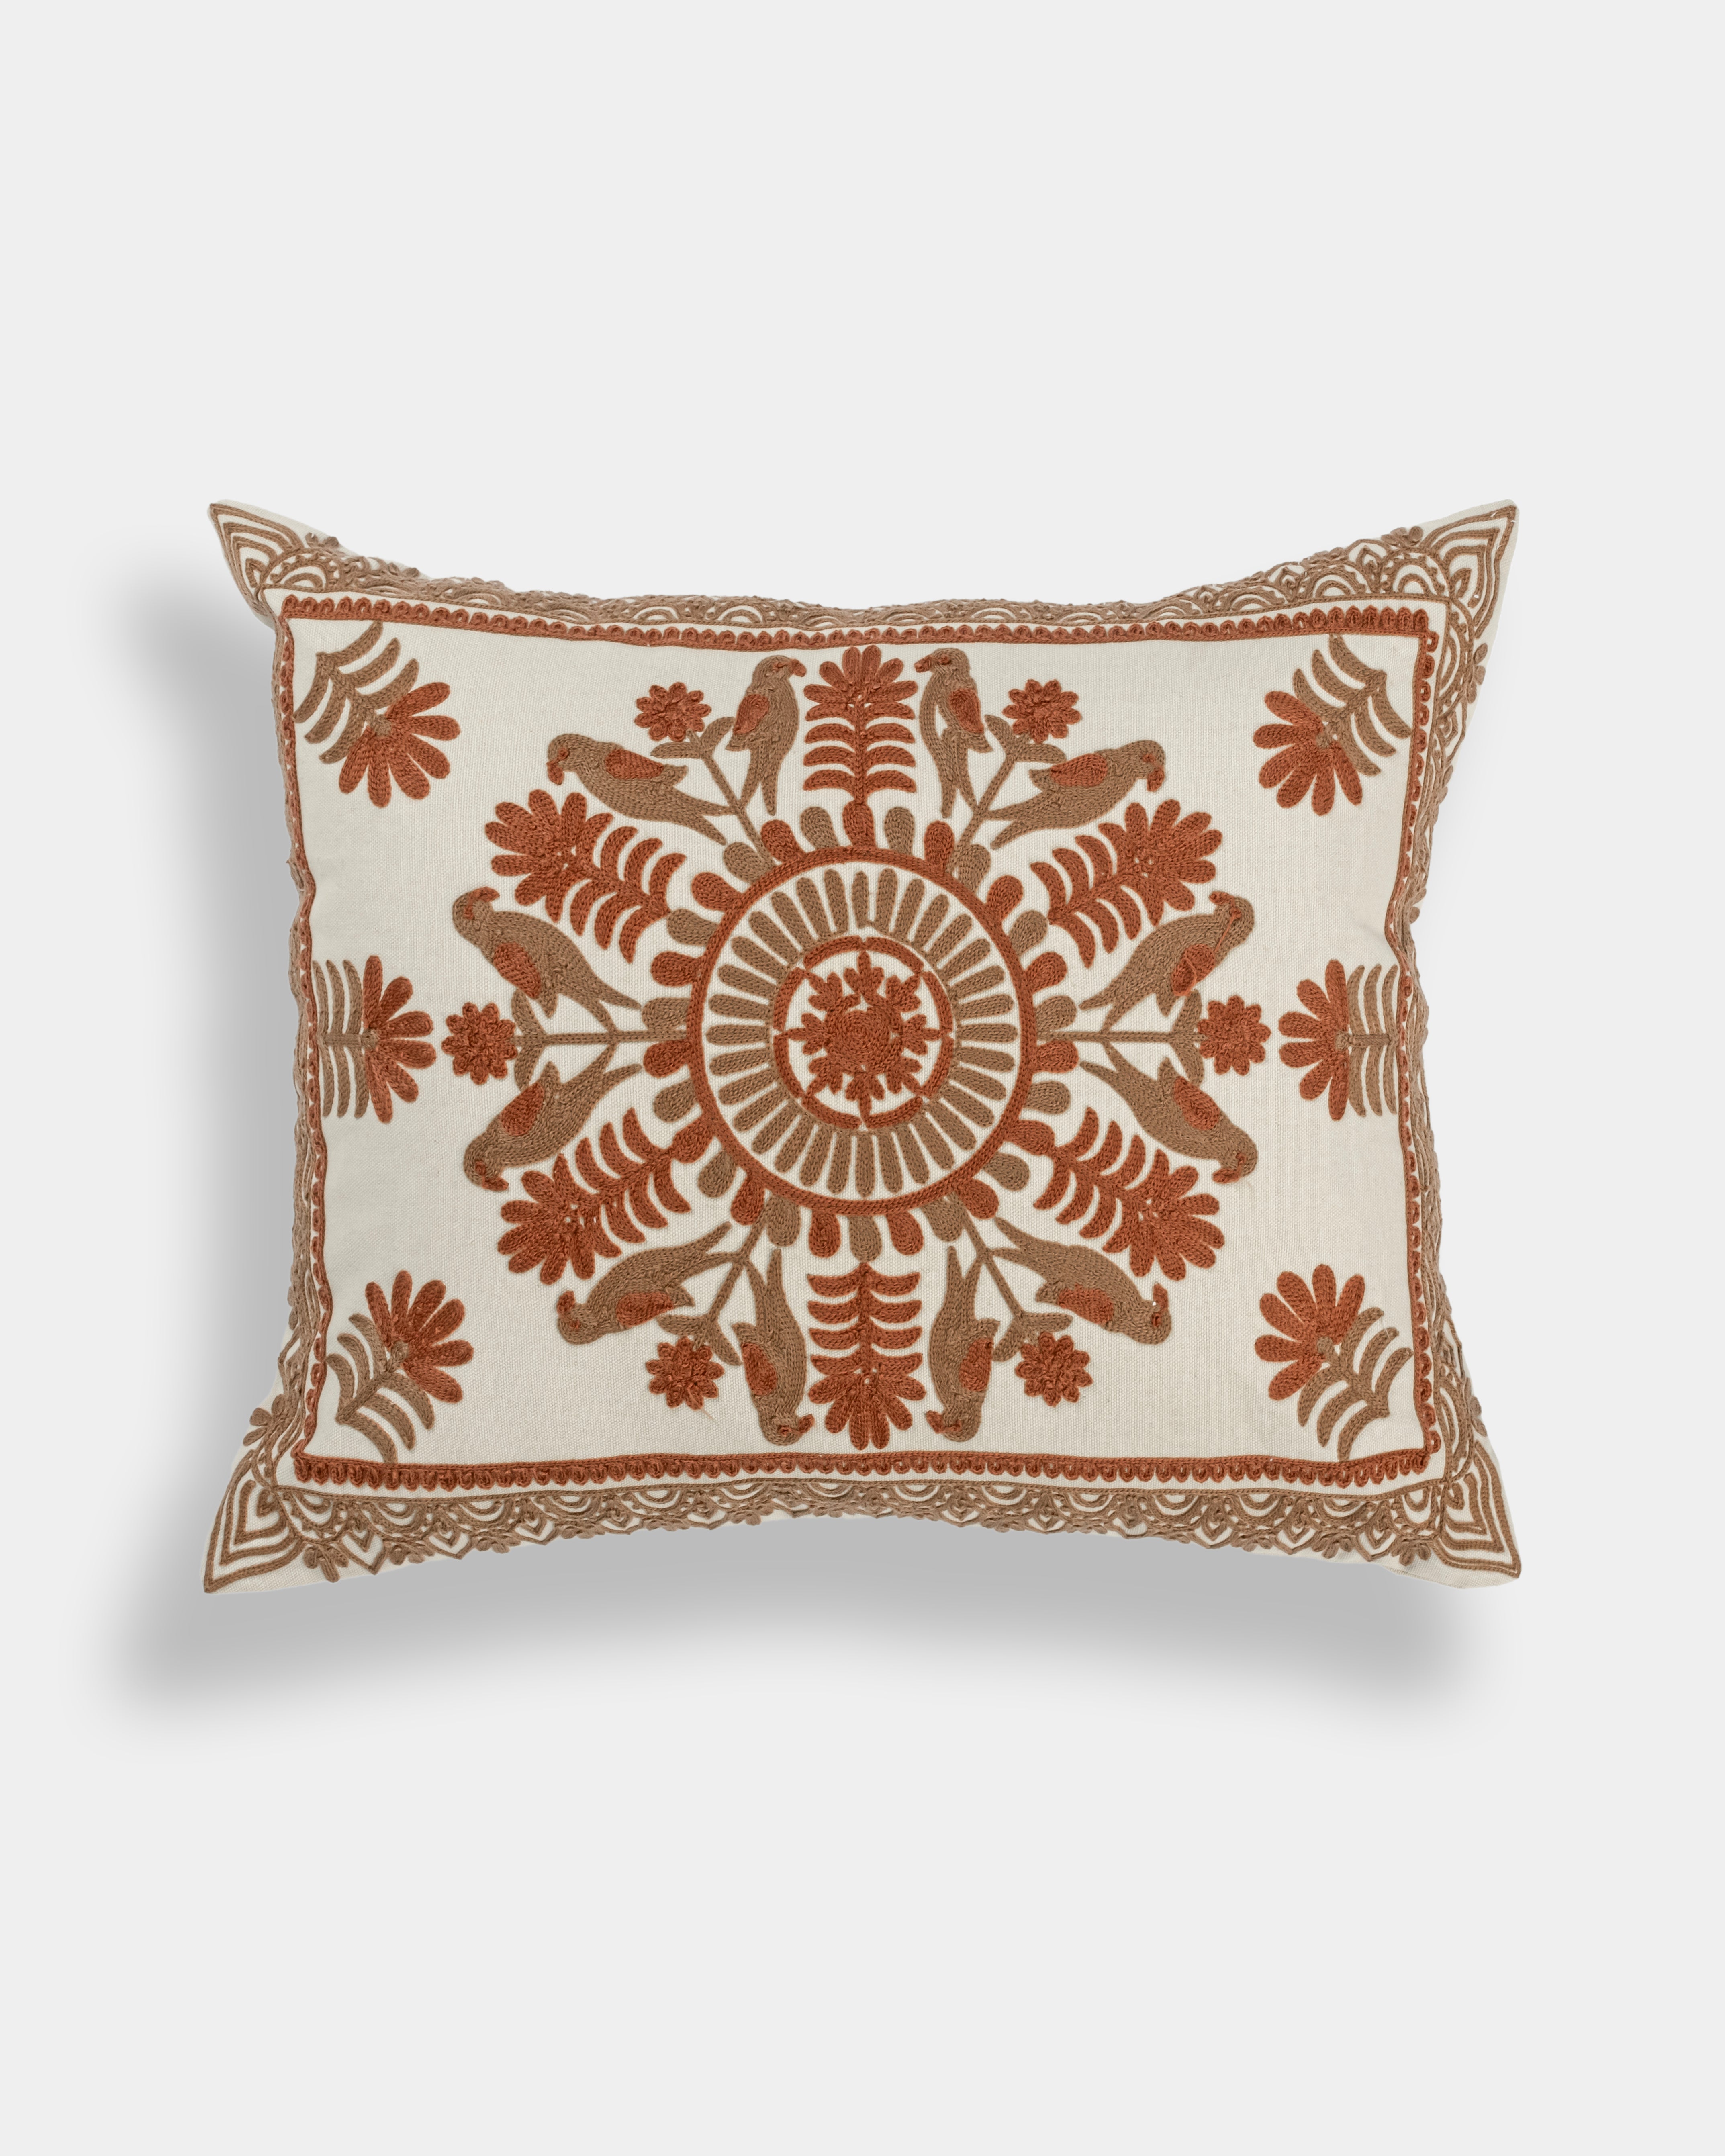 Suzani Pillow | Red  Pillow Cover Fauna 16x20" | Made in Jaipur